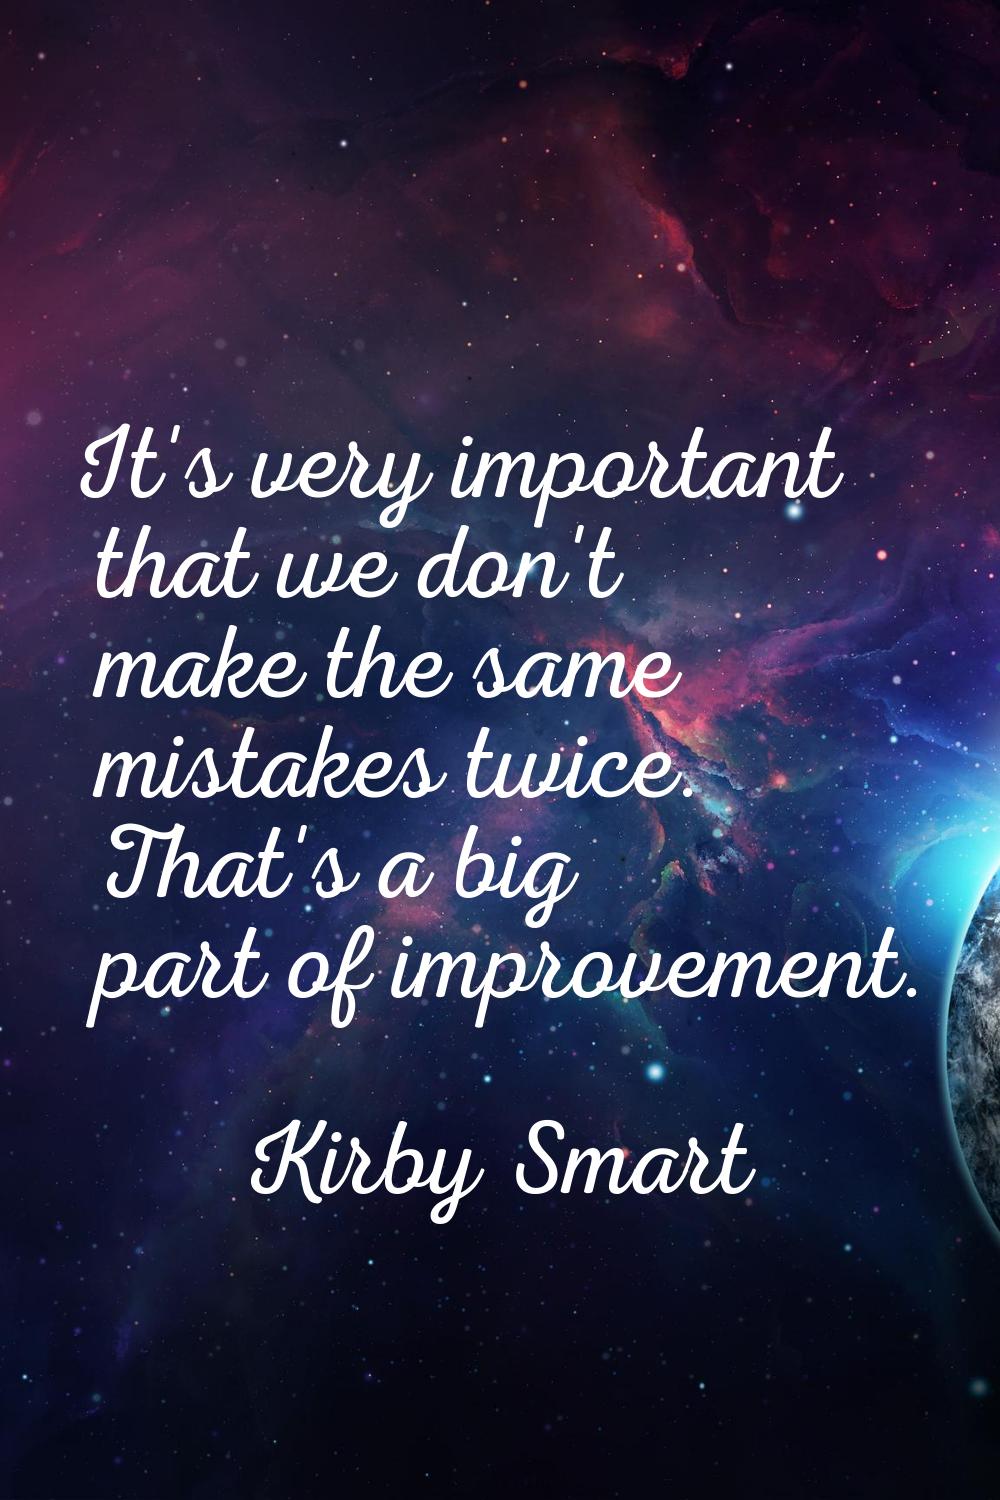 It's very important that we don't make the same mistakes twice. That's a big part of improvement.